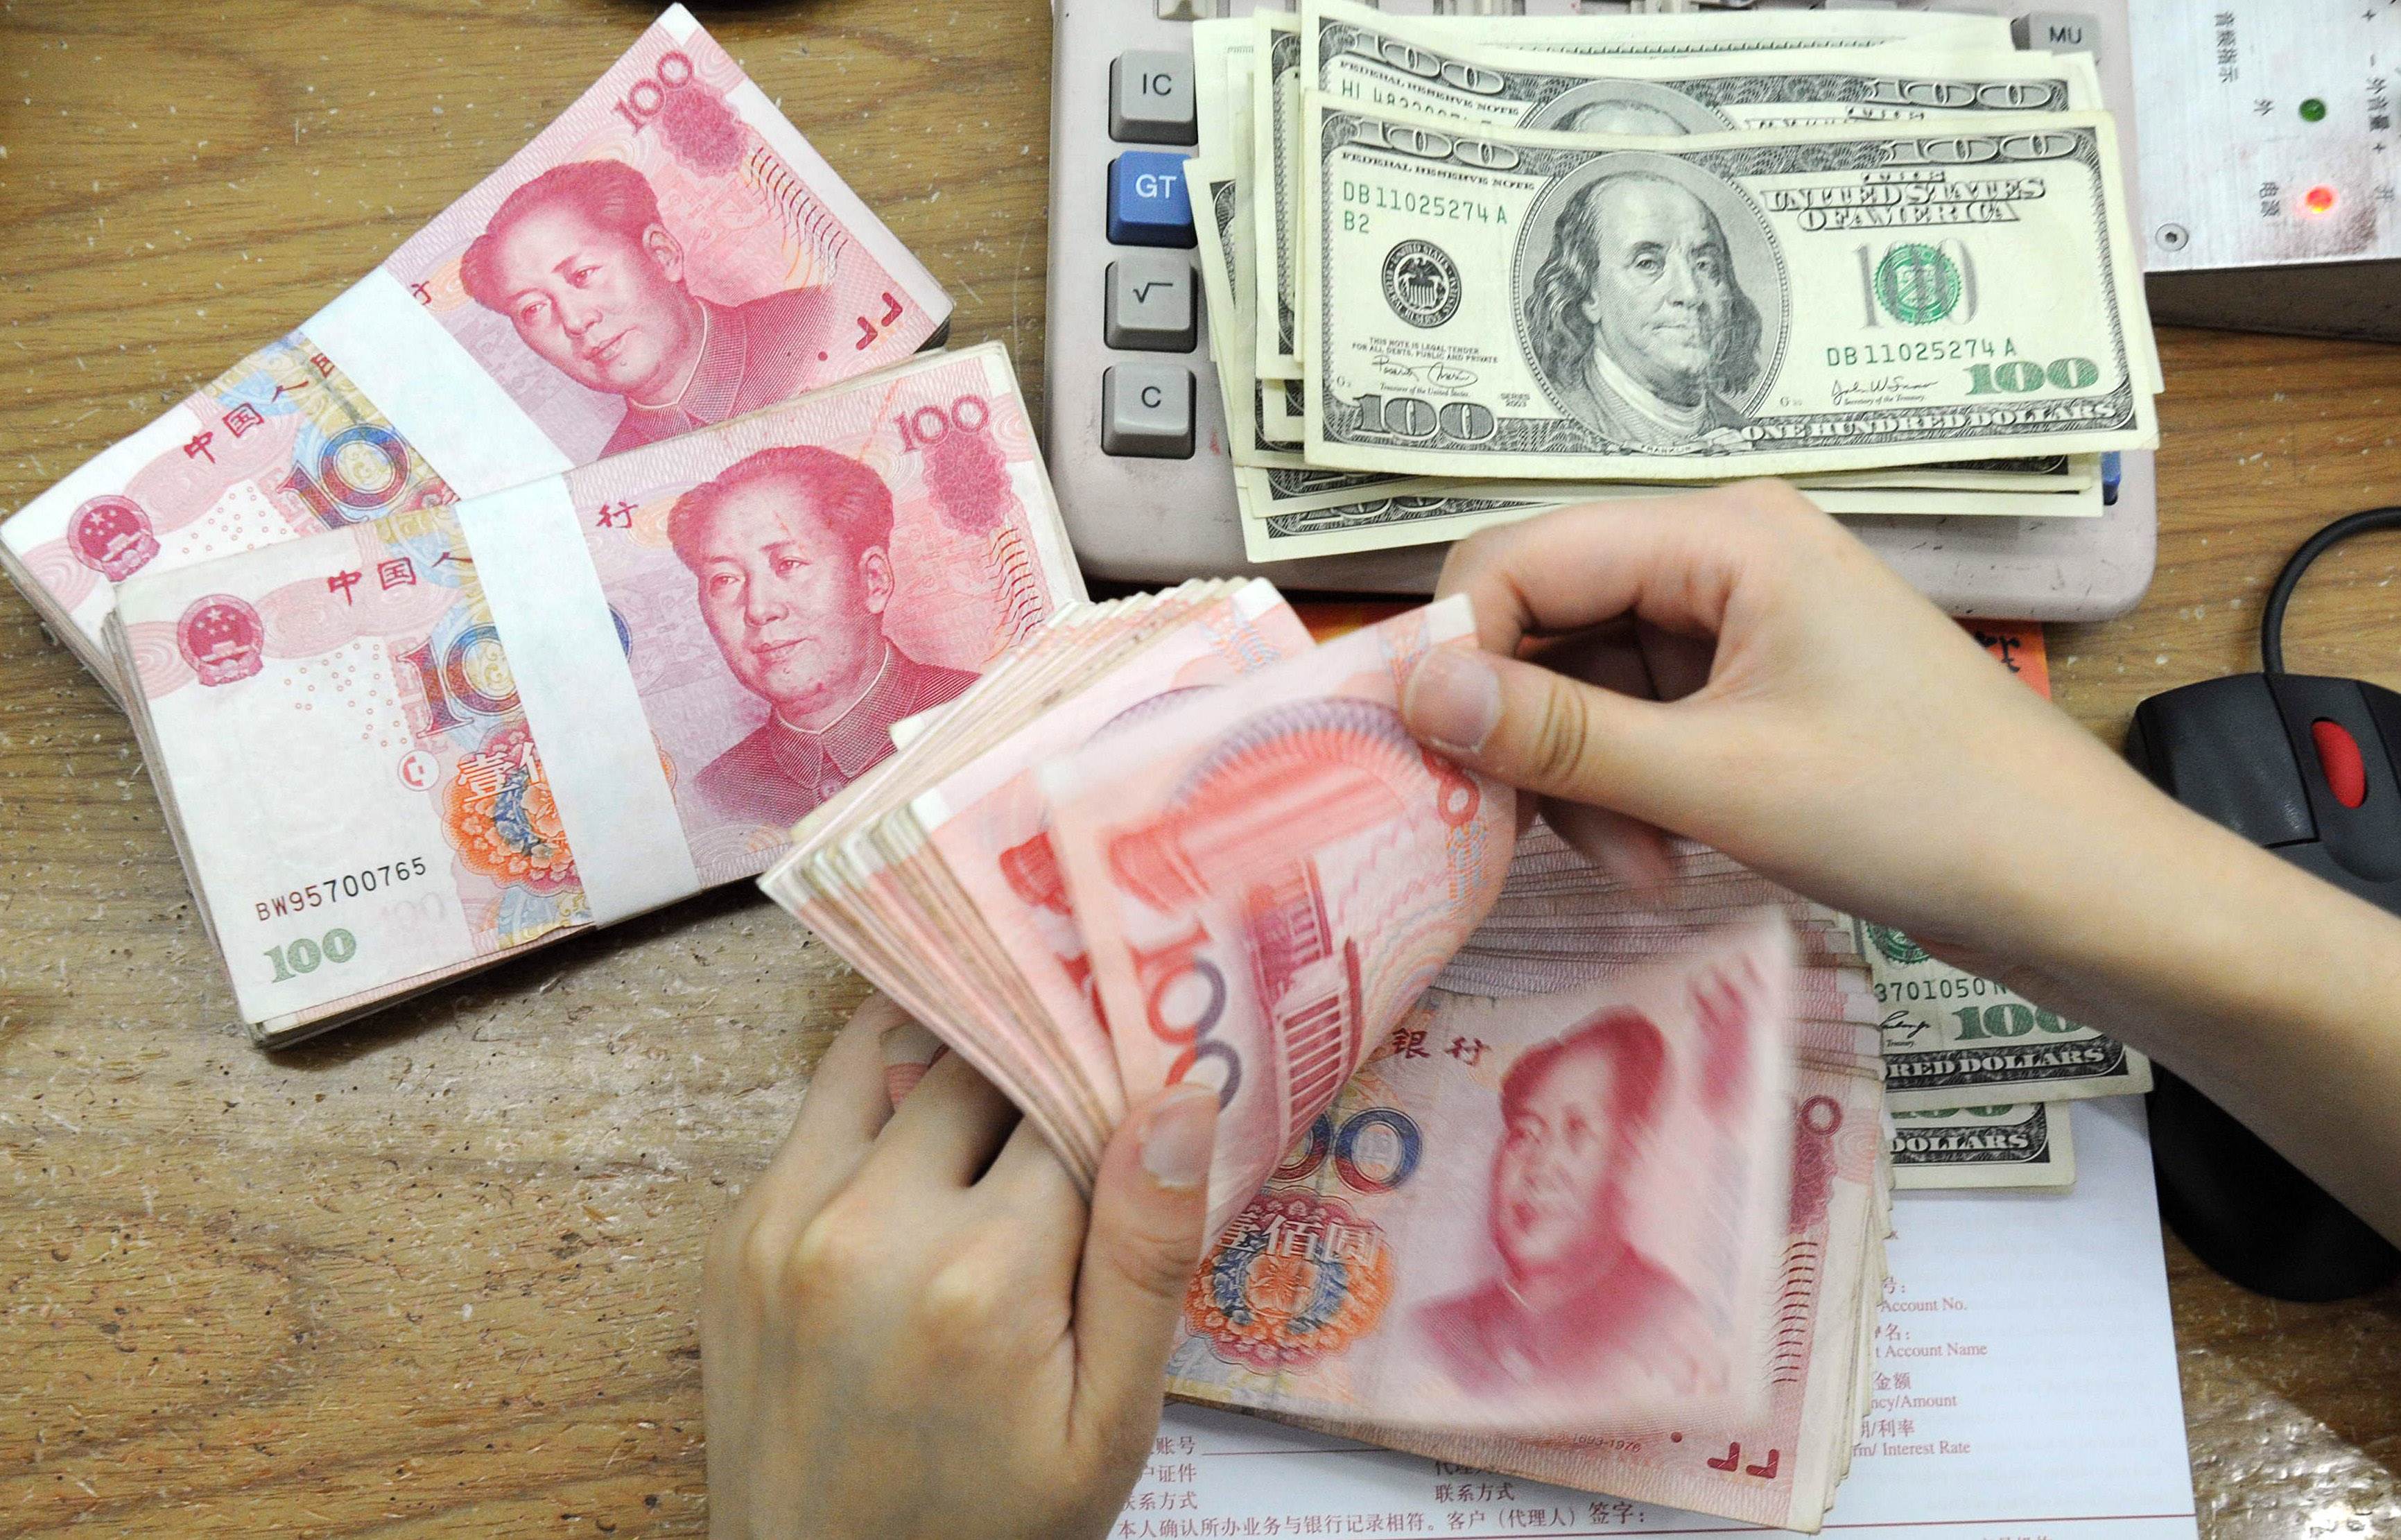 (FILES) This file photo taken on September 30, 2010 shows a Chinese bank worker counting 100-yuan notes and US 100-dollar bills at a bank counter in Hefei, in east China's Anhui province. China's central bank on August 14, 2015 strengthened the yuan currency against the US dollar by 0.05%, the national foreign exchange market said, ending three days of falls after a surprise devaluation. CHINA OUT AFP PHOTO / FILES